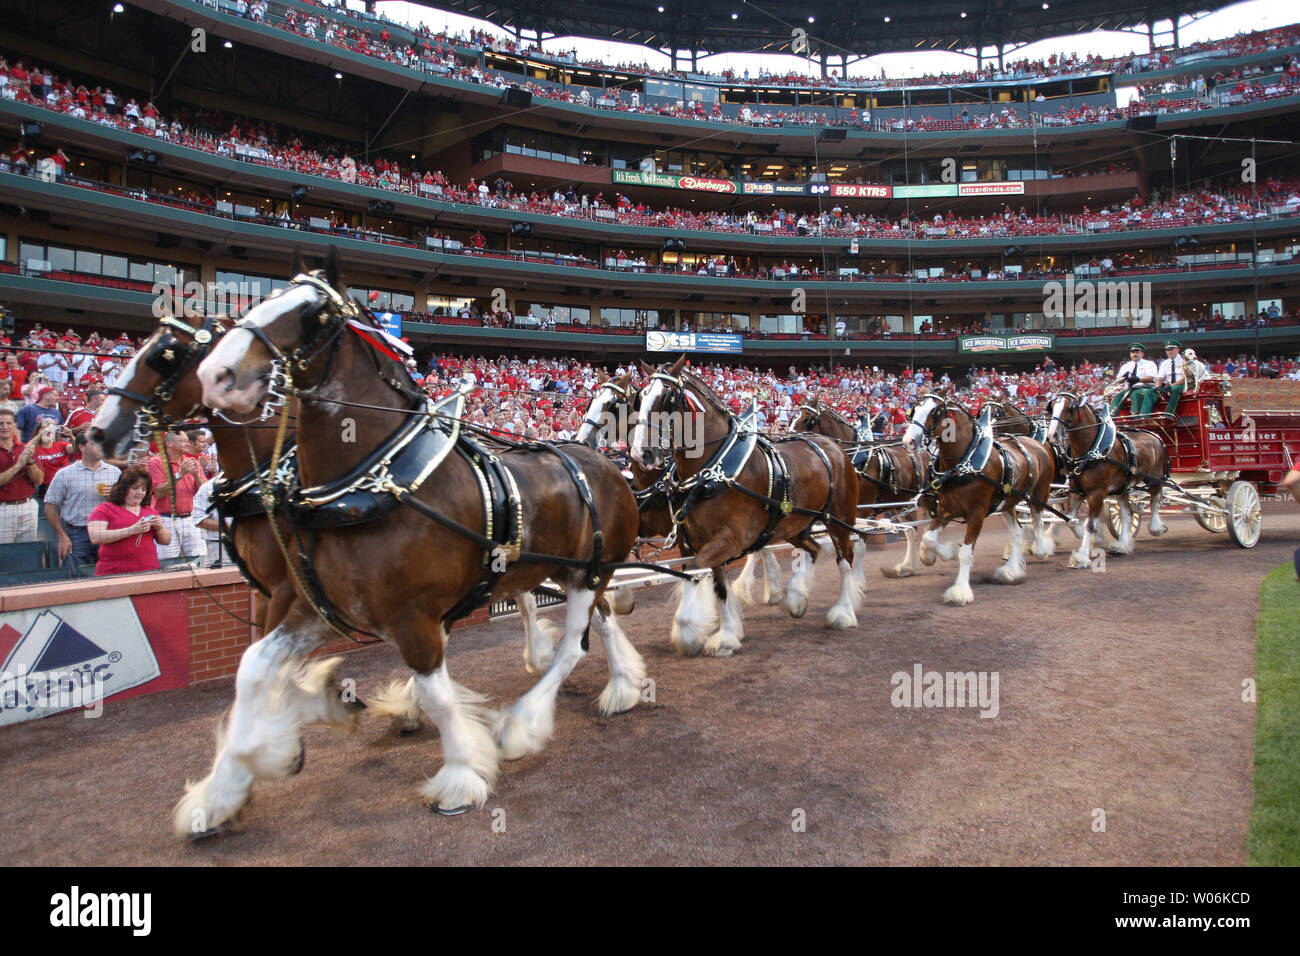 The Anheuser-Busch Clydesdale eight horse hitch makes its way